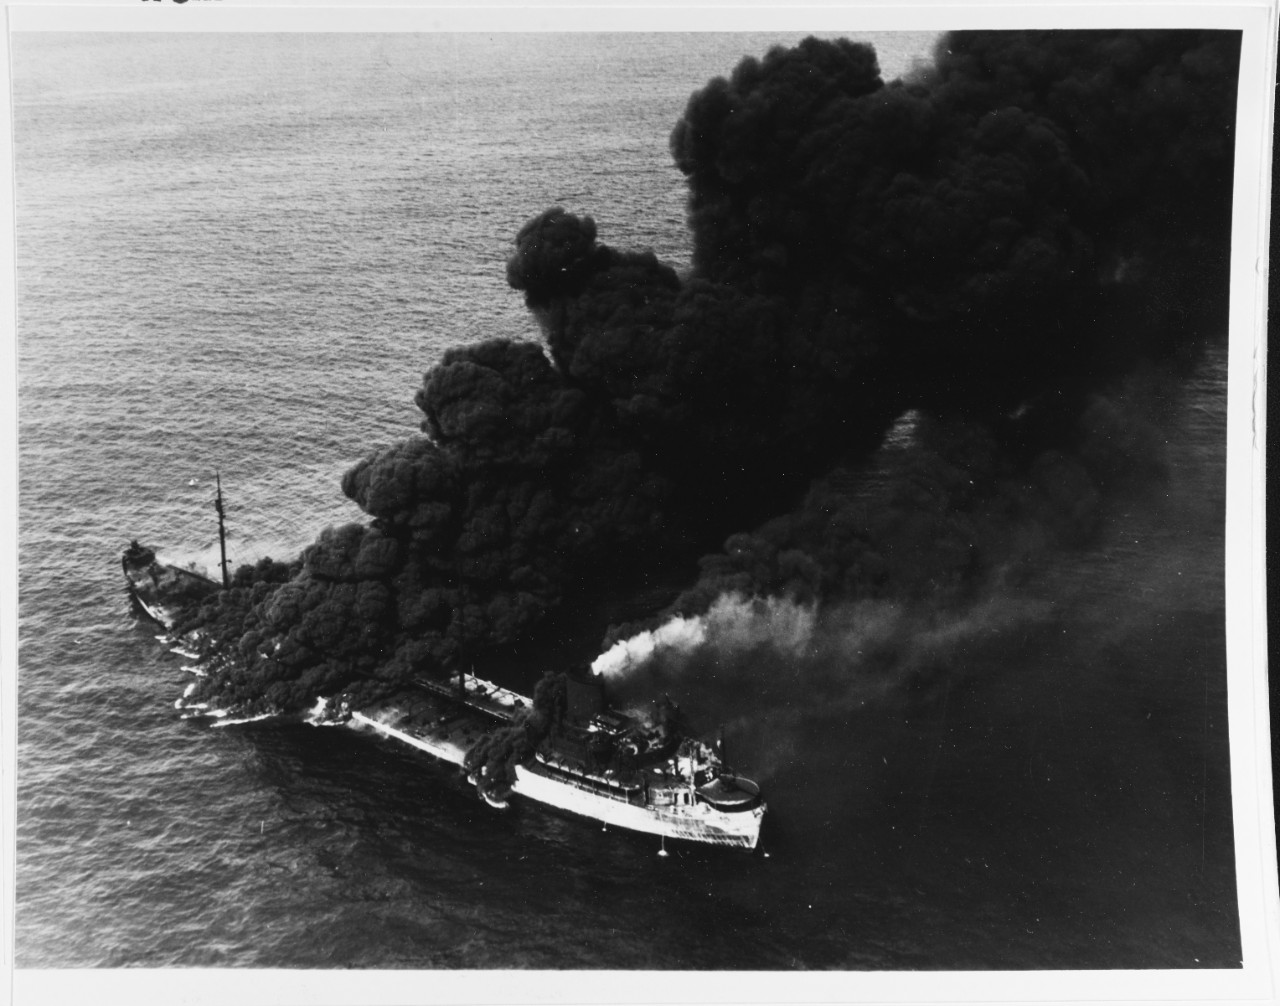 SS Pennsylvania Sun burning after being torpedoed by U-571, July 1942. Naval History & Heritage Command photograph #80-G-61599.